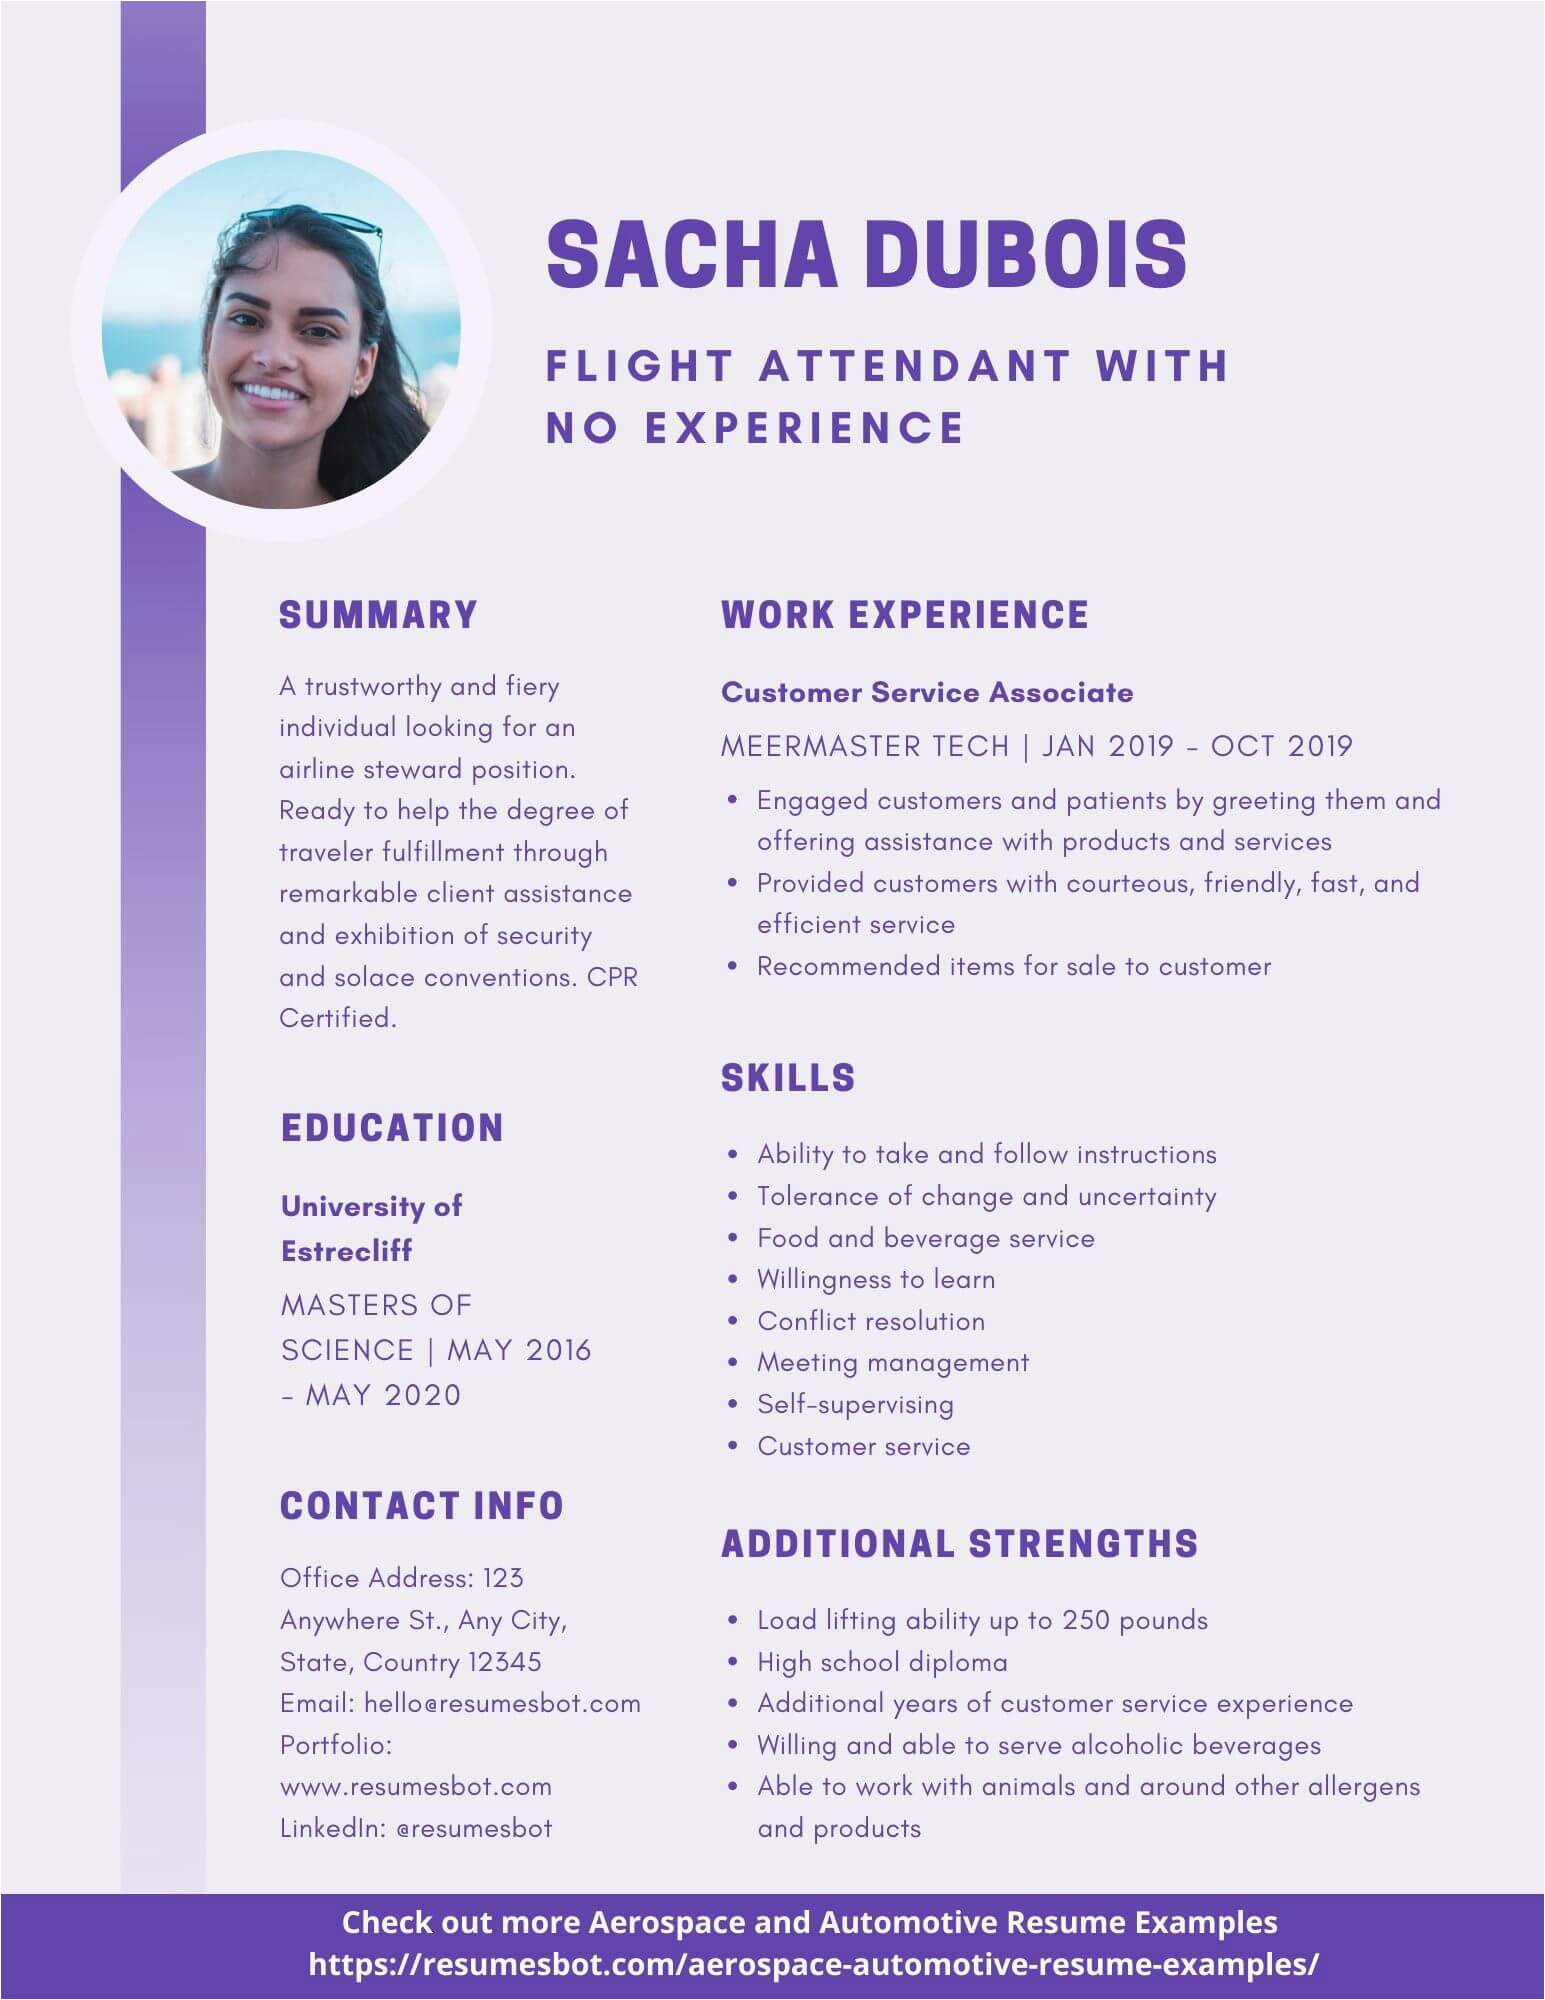 Sample Resume for Flight attendant with No Experience Pdf Flight attendant with No Experience Resume Samples and